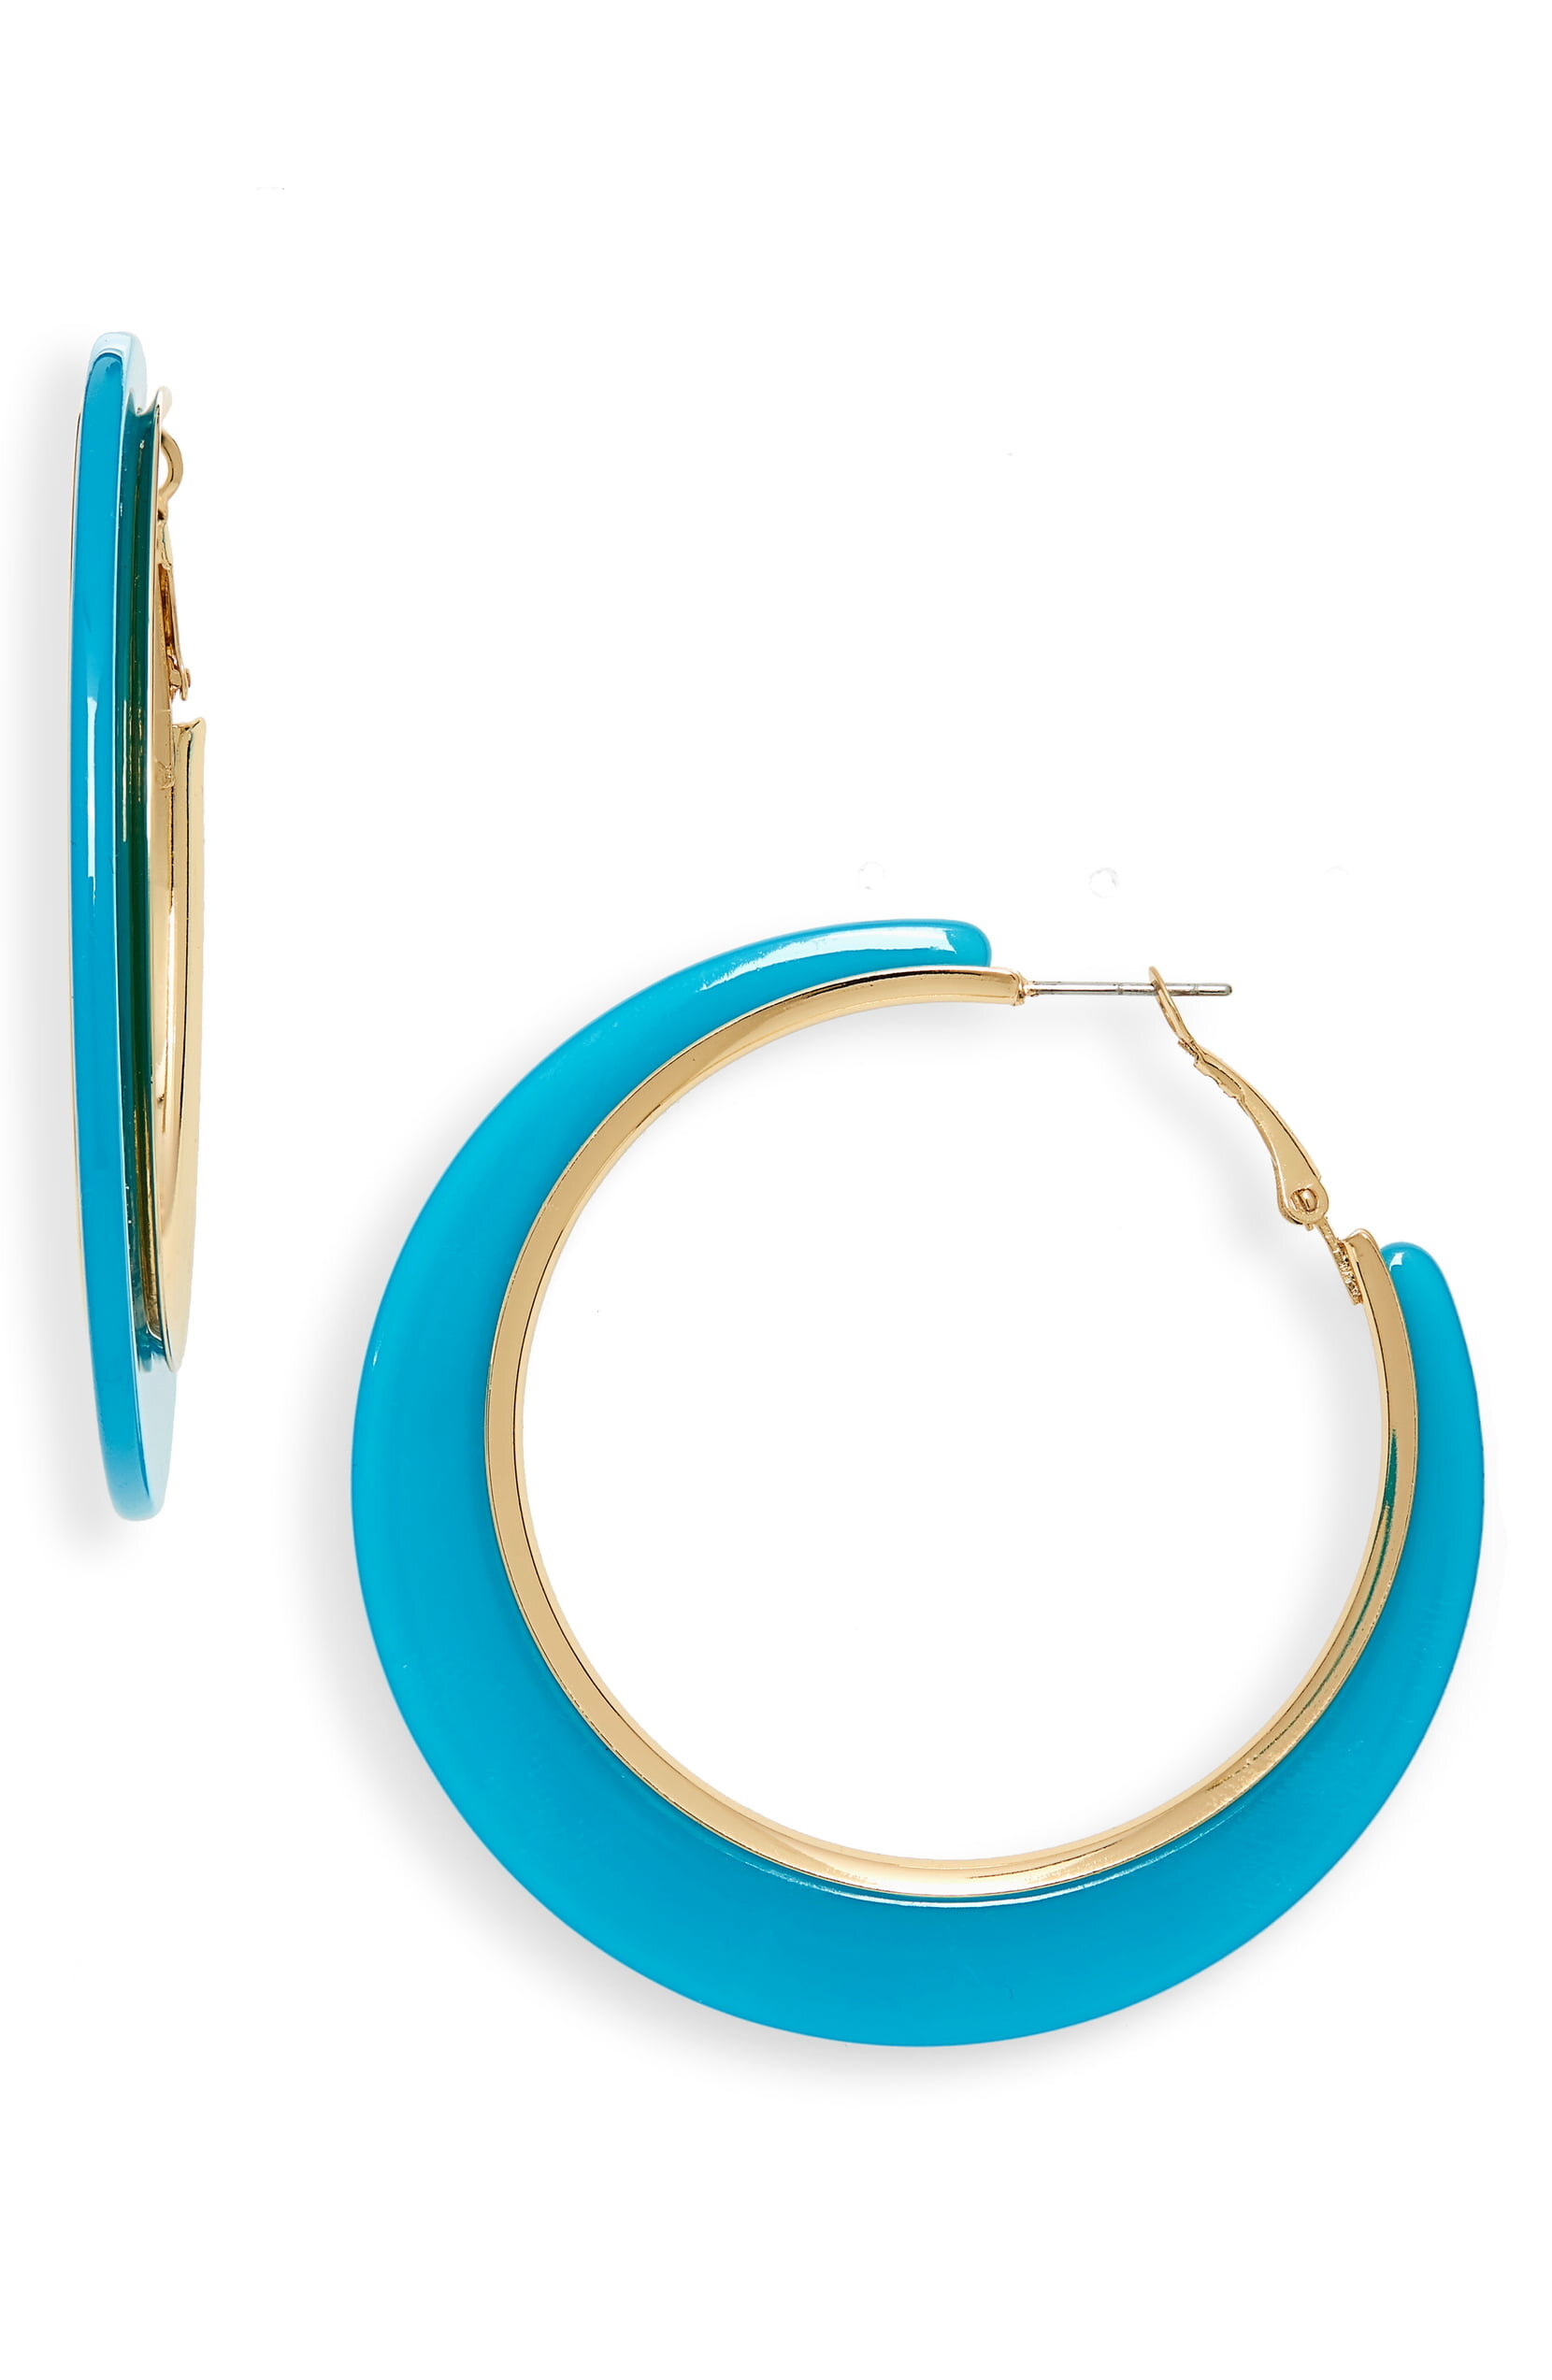 It's impossible to be depressed when you are wearing bold hoops that cost under $10. Try it. You'll see.